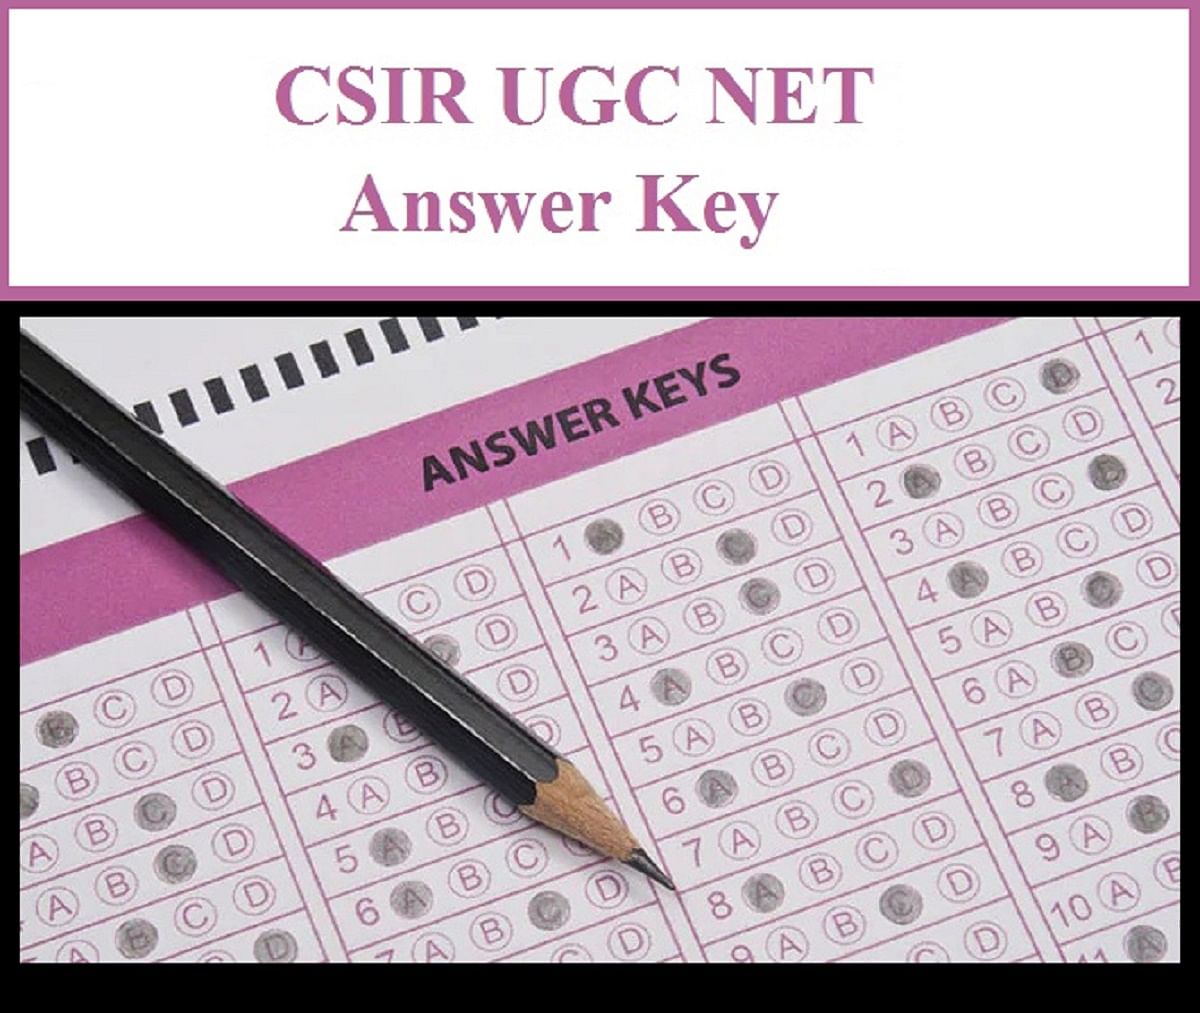 CSIR NET Answer Key 2019 Issued, Know How to Download